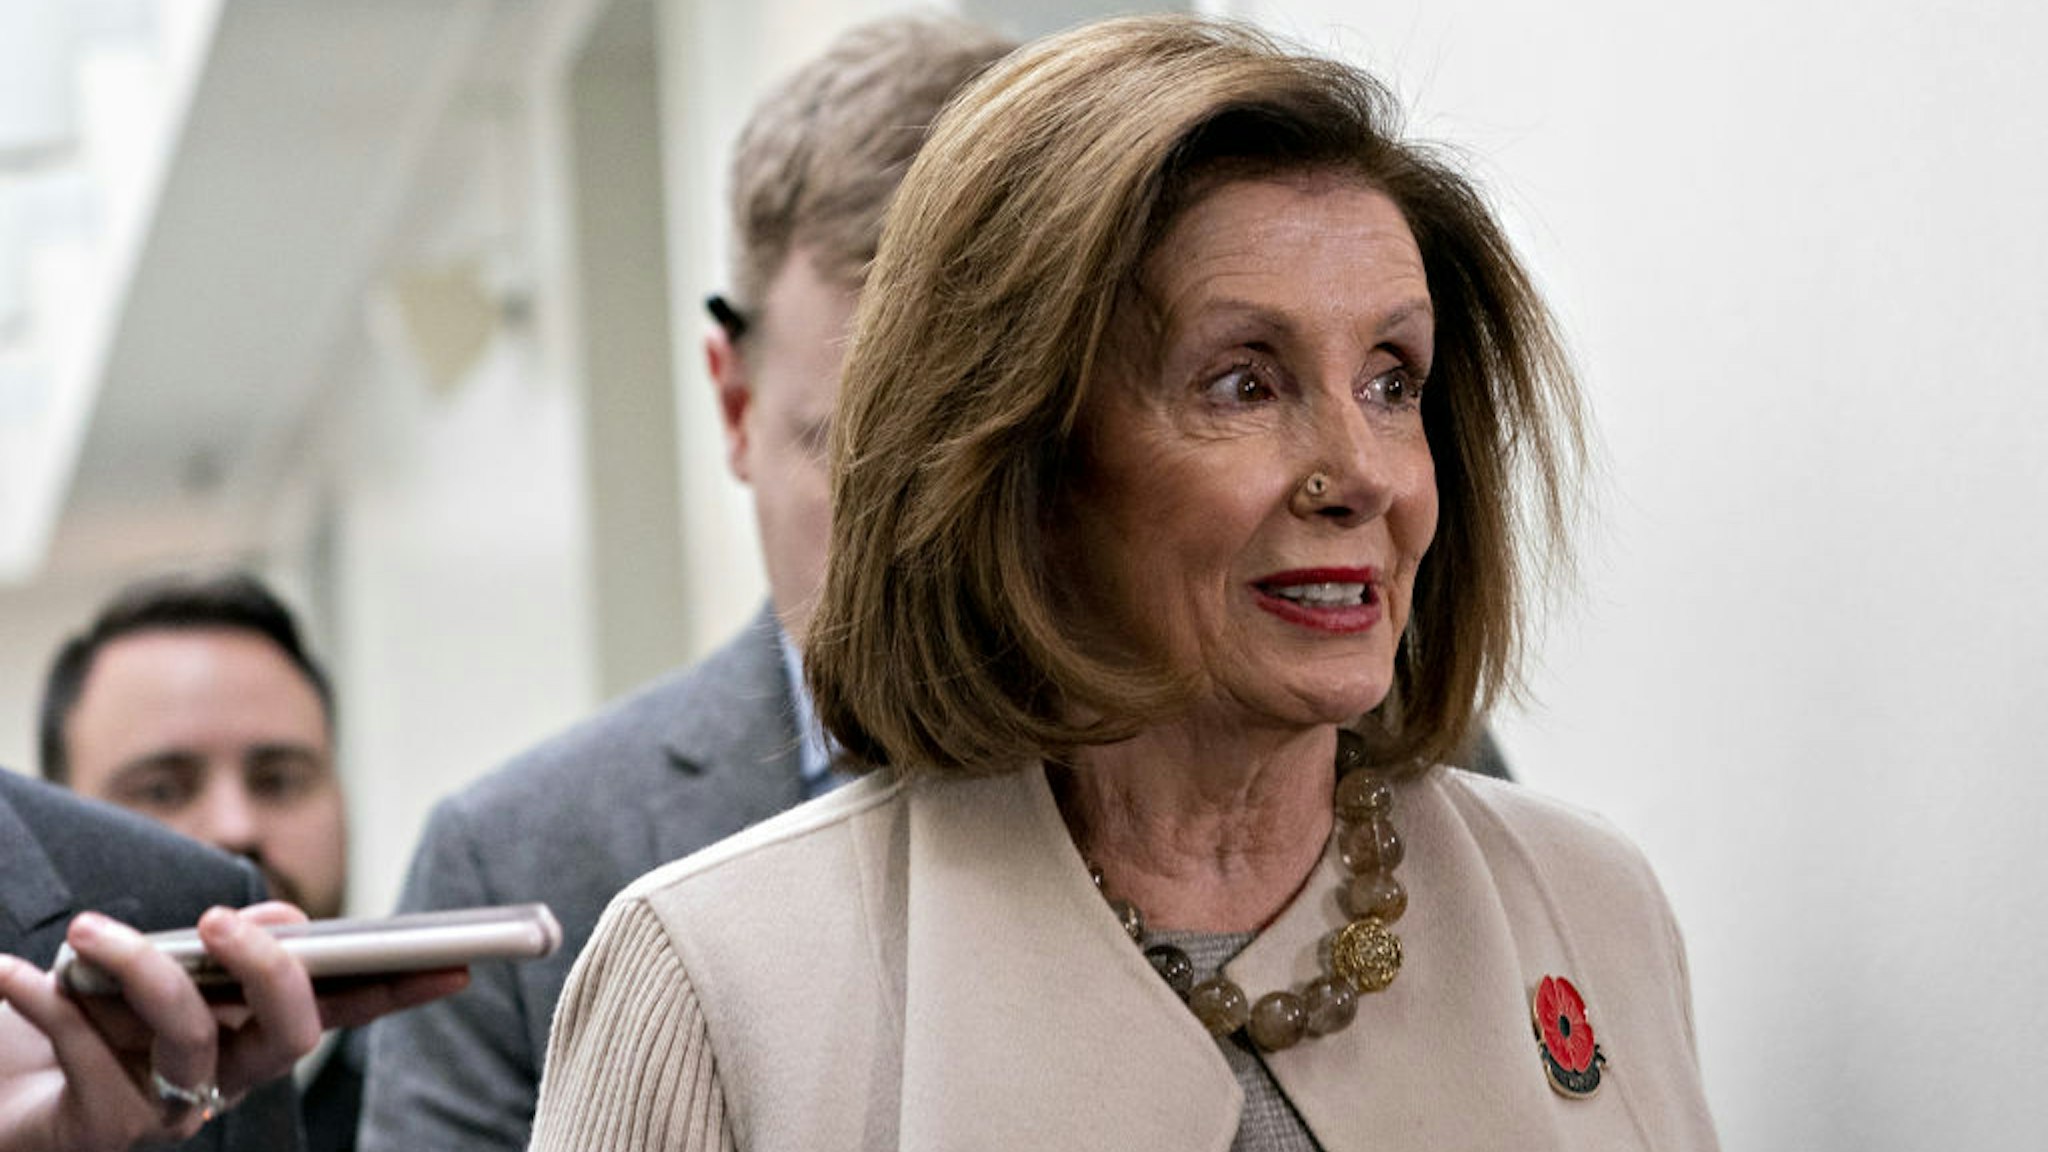 U.S. House Speaker Nancy Pelosi, a Democrat from California, exits after a House Democratic caucus meeting at the U.S. Capitol in Washington, D.C., U.S., on Tuesday, Dec. 17, 2019. The House Rules Committee this morning will begin what could be an all-day meeting to write the procedures for the floor debate and vote on impeachment of President Donald Trump. Photographer: Andrew Harrer/Bloomberg